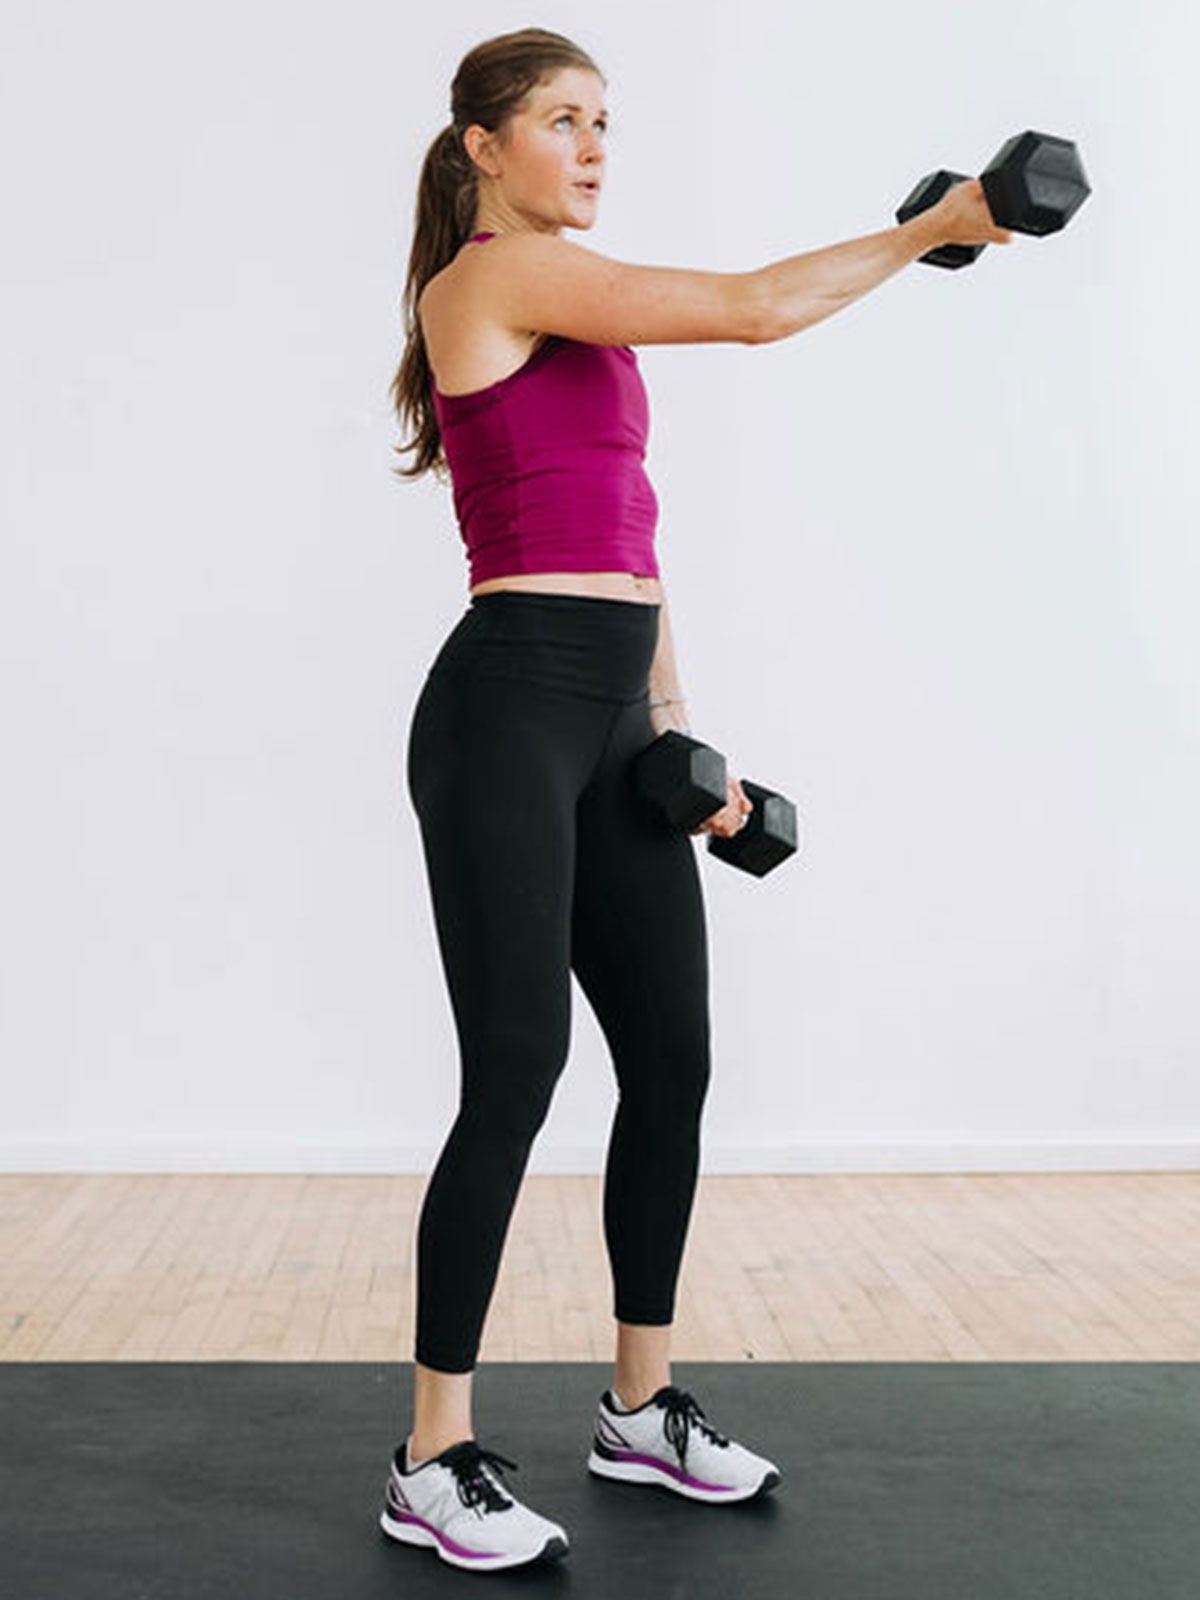 5 Dumbbell Exercises for a Strong Chest (No Push Ups)! - Nourish, Move, Love